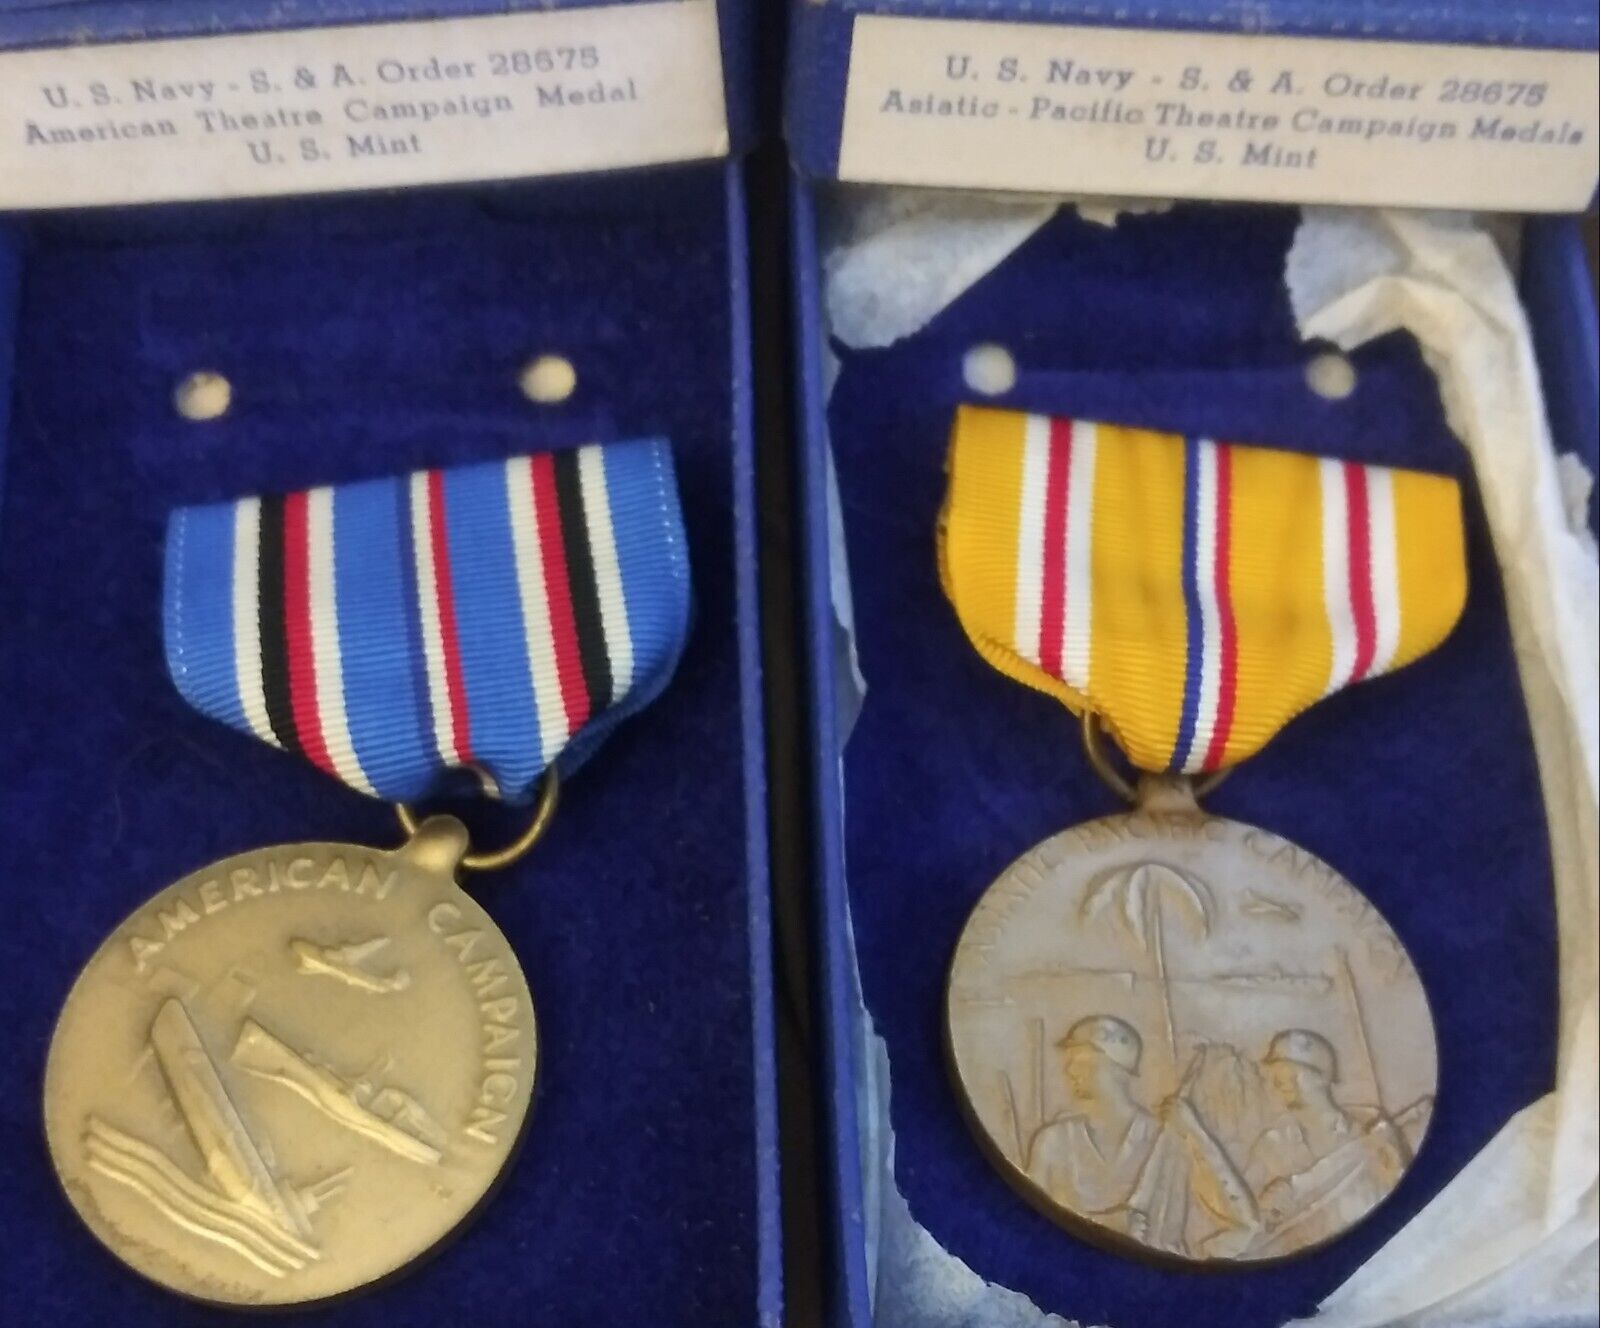 US Mint WWII NAVY medals Pacific+American Theatre Campaign Medal S&A Order 28675